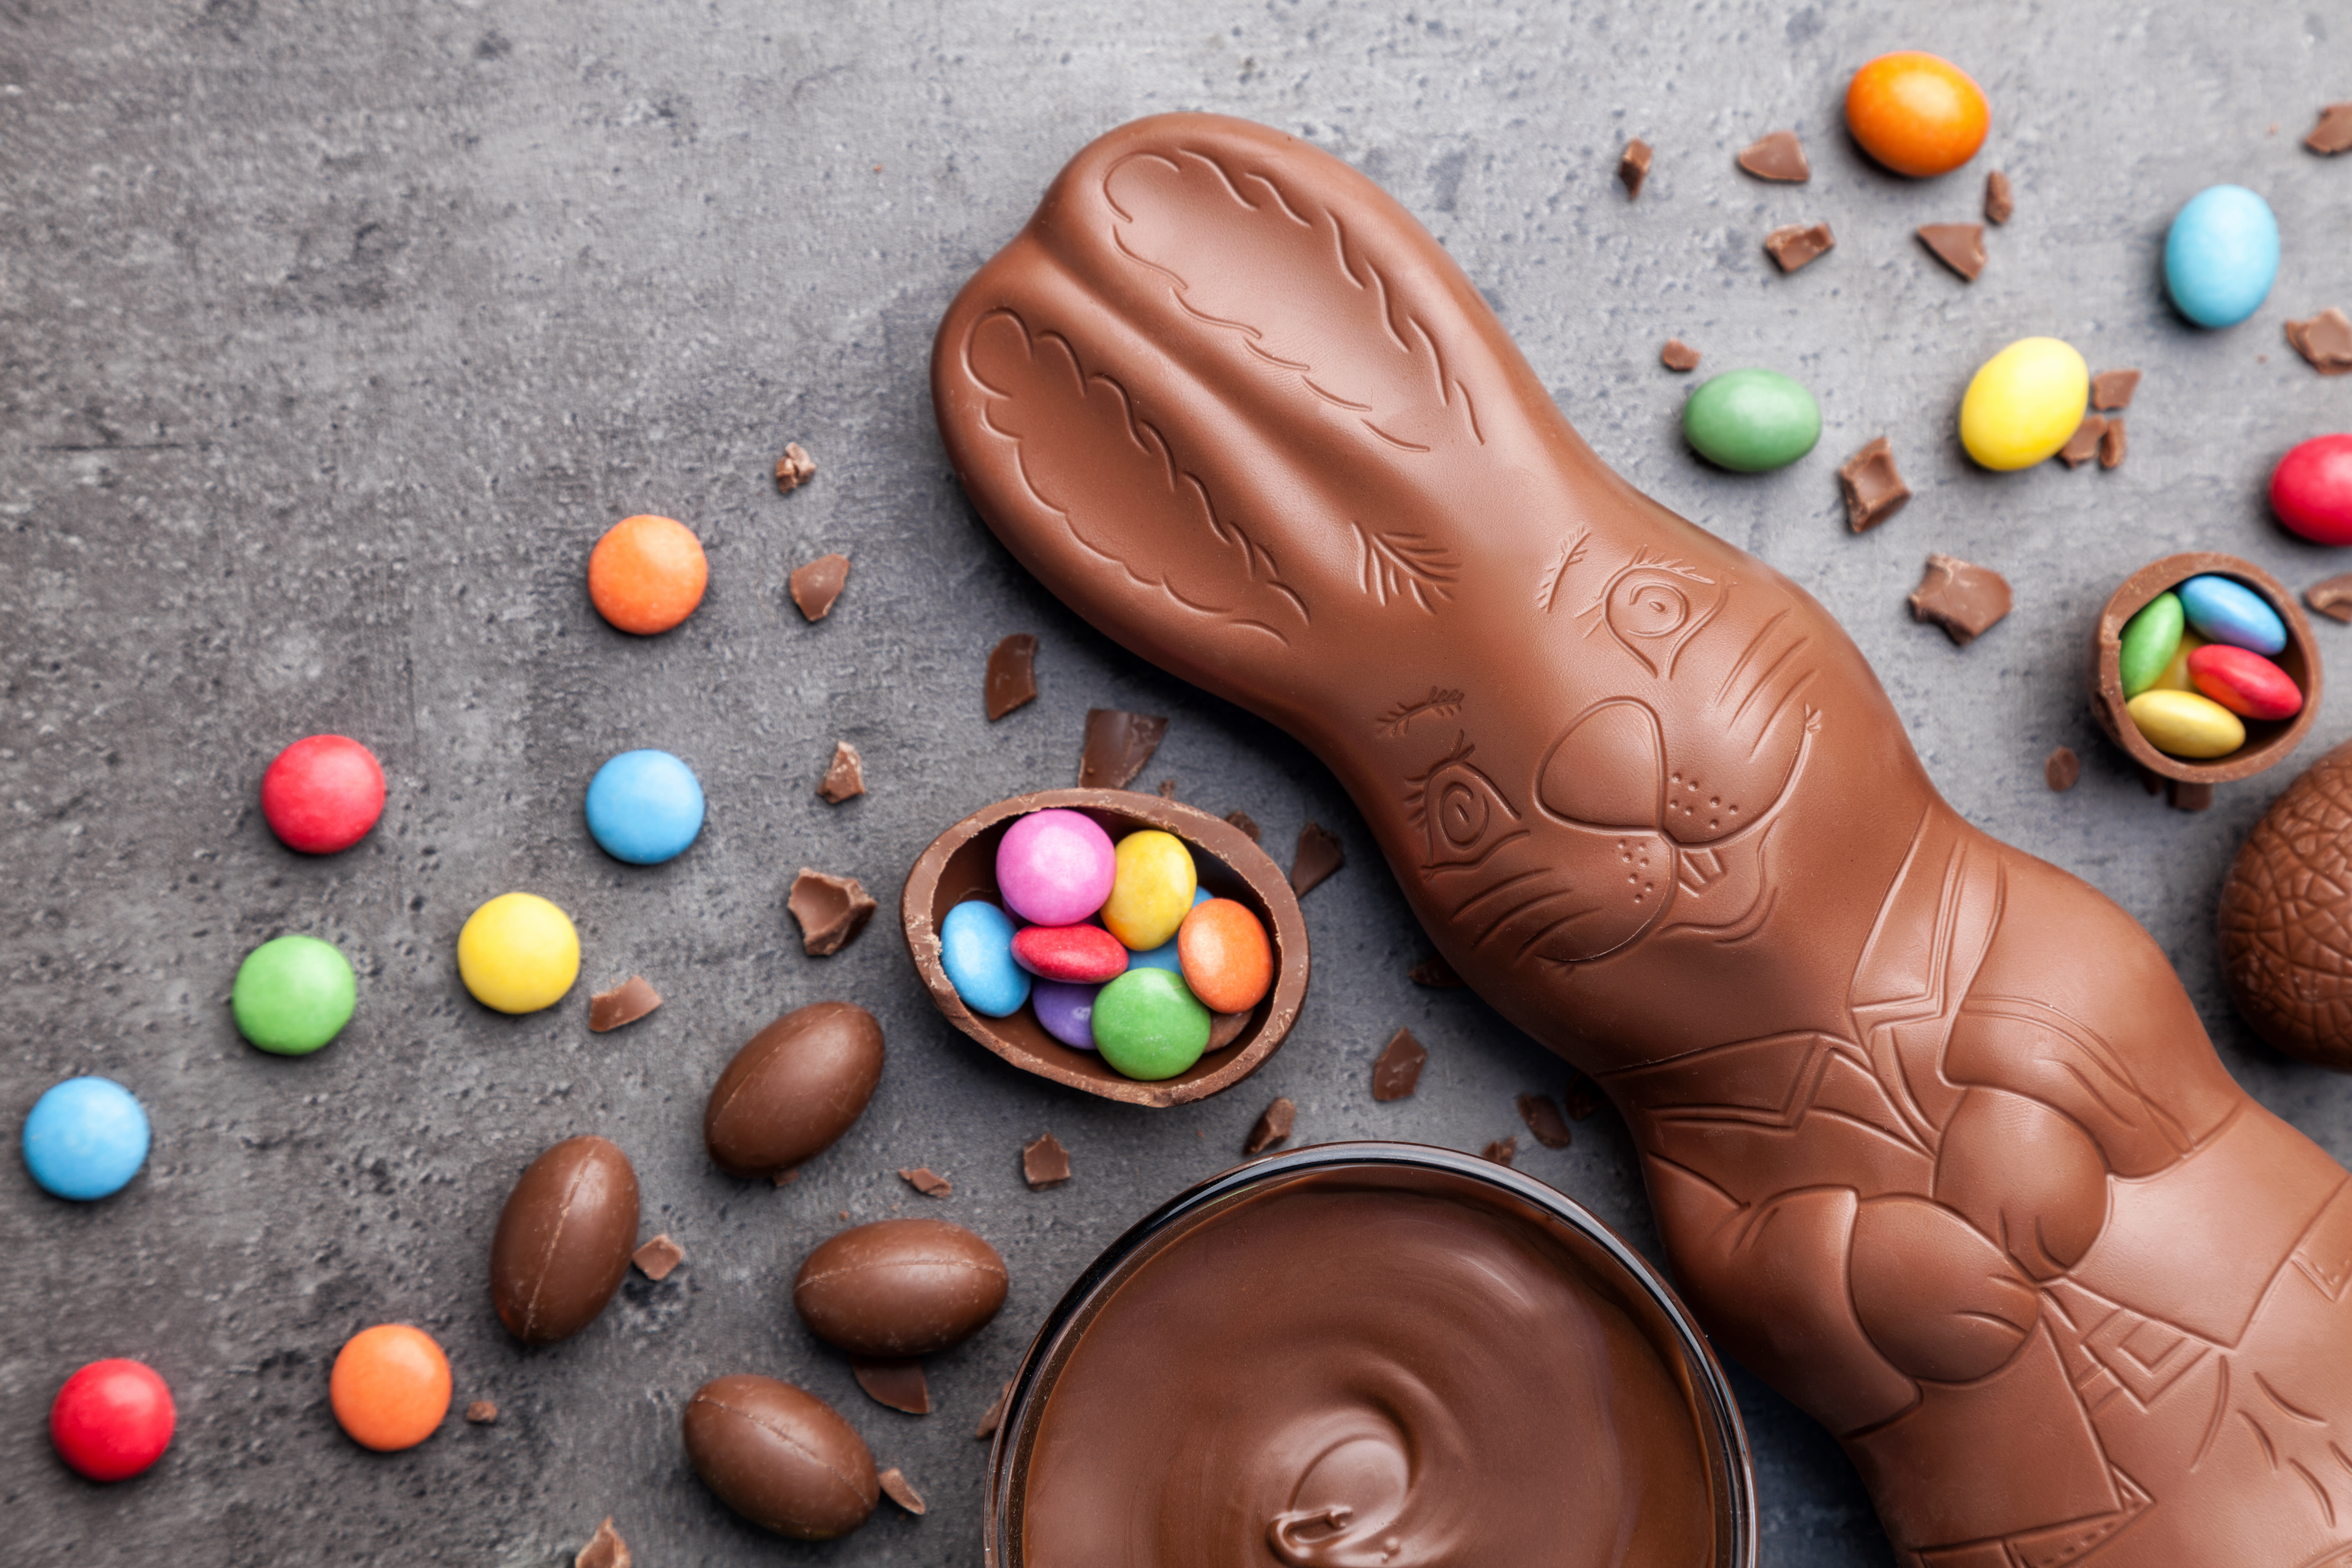 UK to spend nearly £4bn on Easter food and gifts